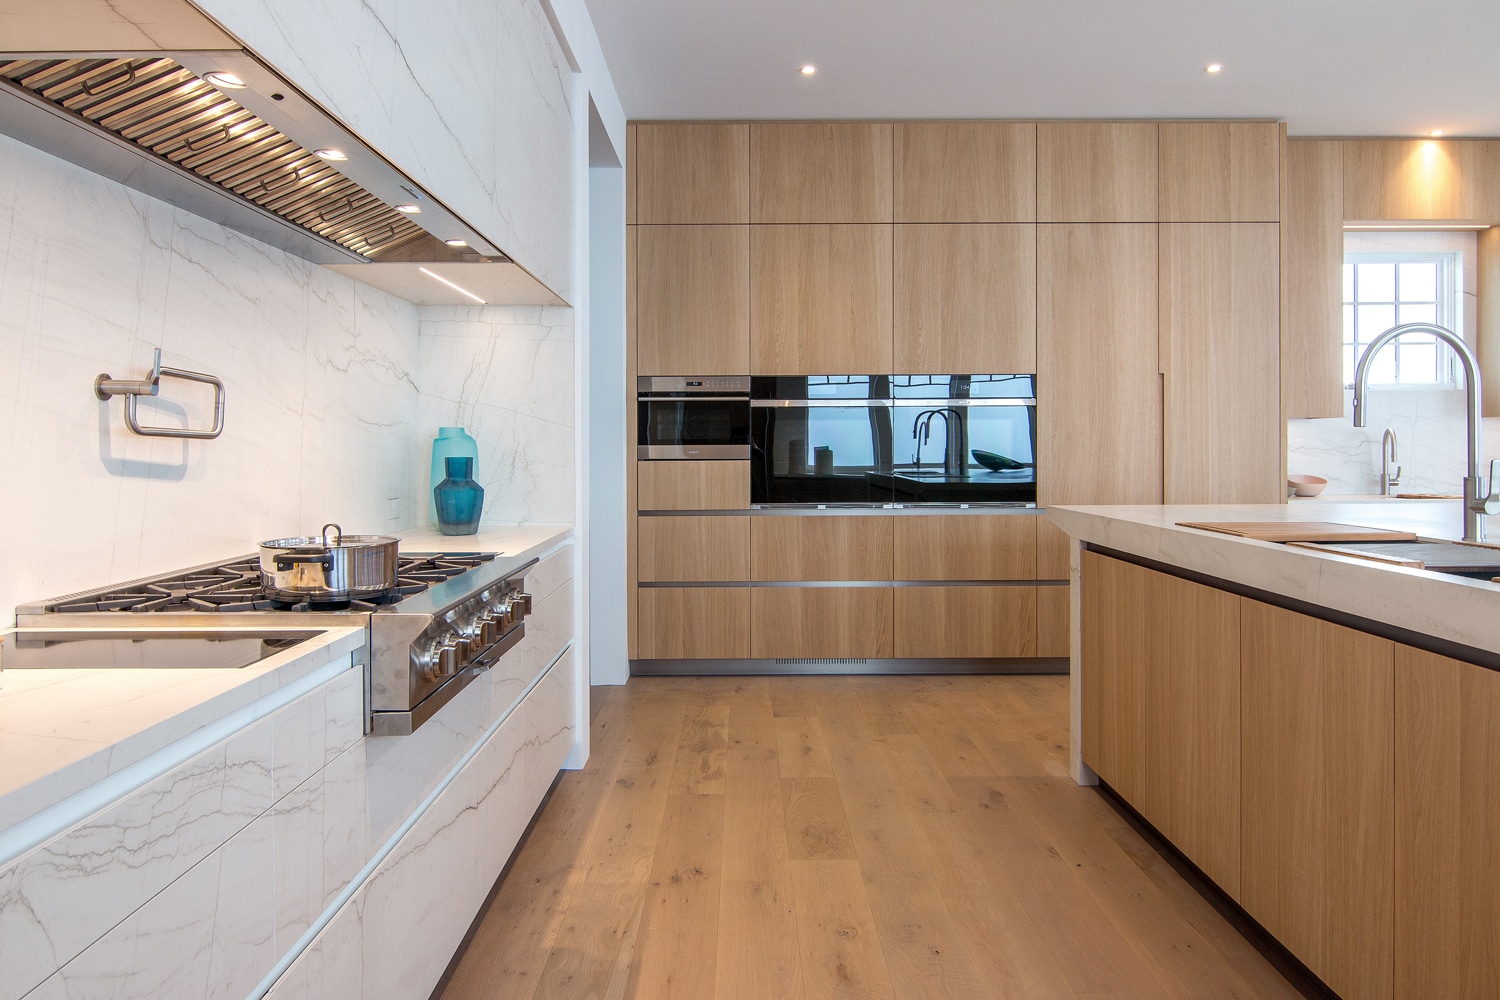 Monmouth | Rumson, New Jersey. Bespoke UNICA kitchen. The cooking unit features Neolith Mont Blanc on cabinets, counters, and backsplash. The rest of the cabinetry is in Bleached Light Oak. Titanium toe-kicks and channels. Designed by Maria Filimonova, designer of MandiCasa New York Flagship and the showroom team in collaboration with Anderson Campanella Architects. Bluestar range/hood. 